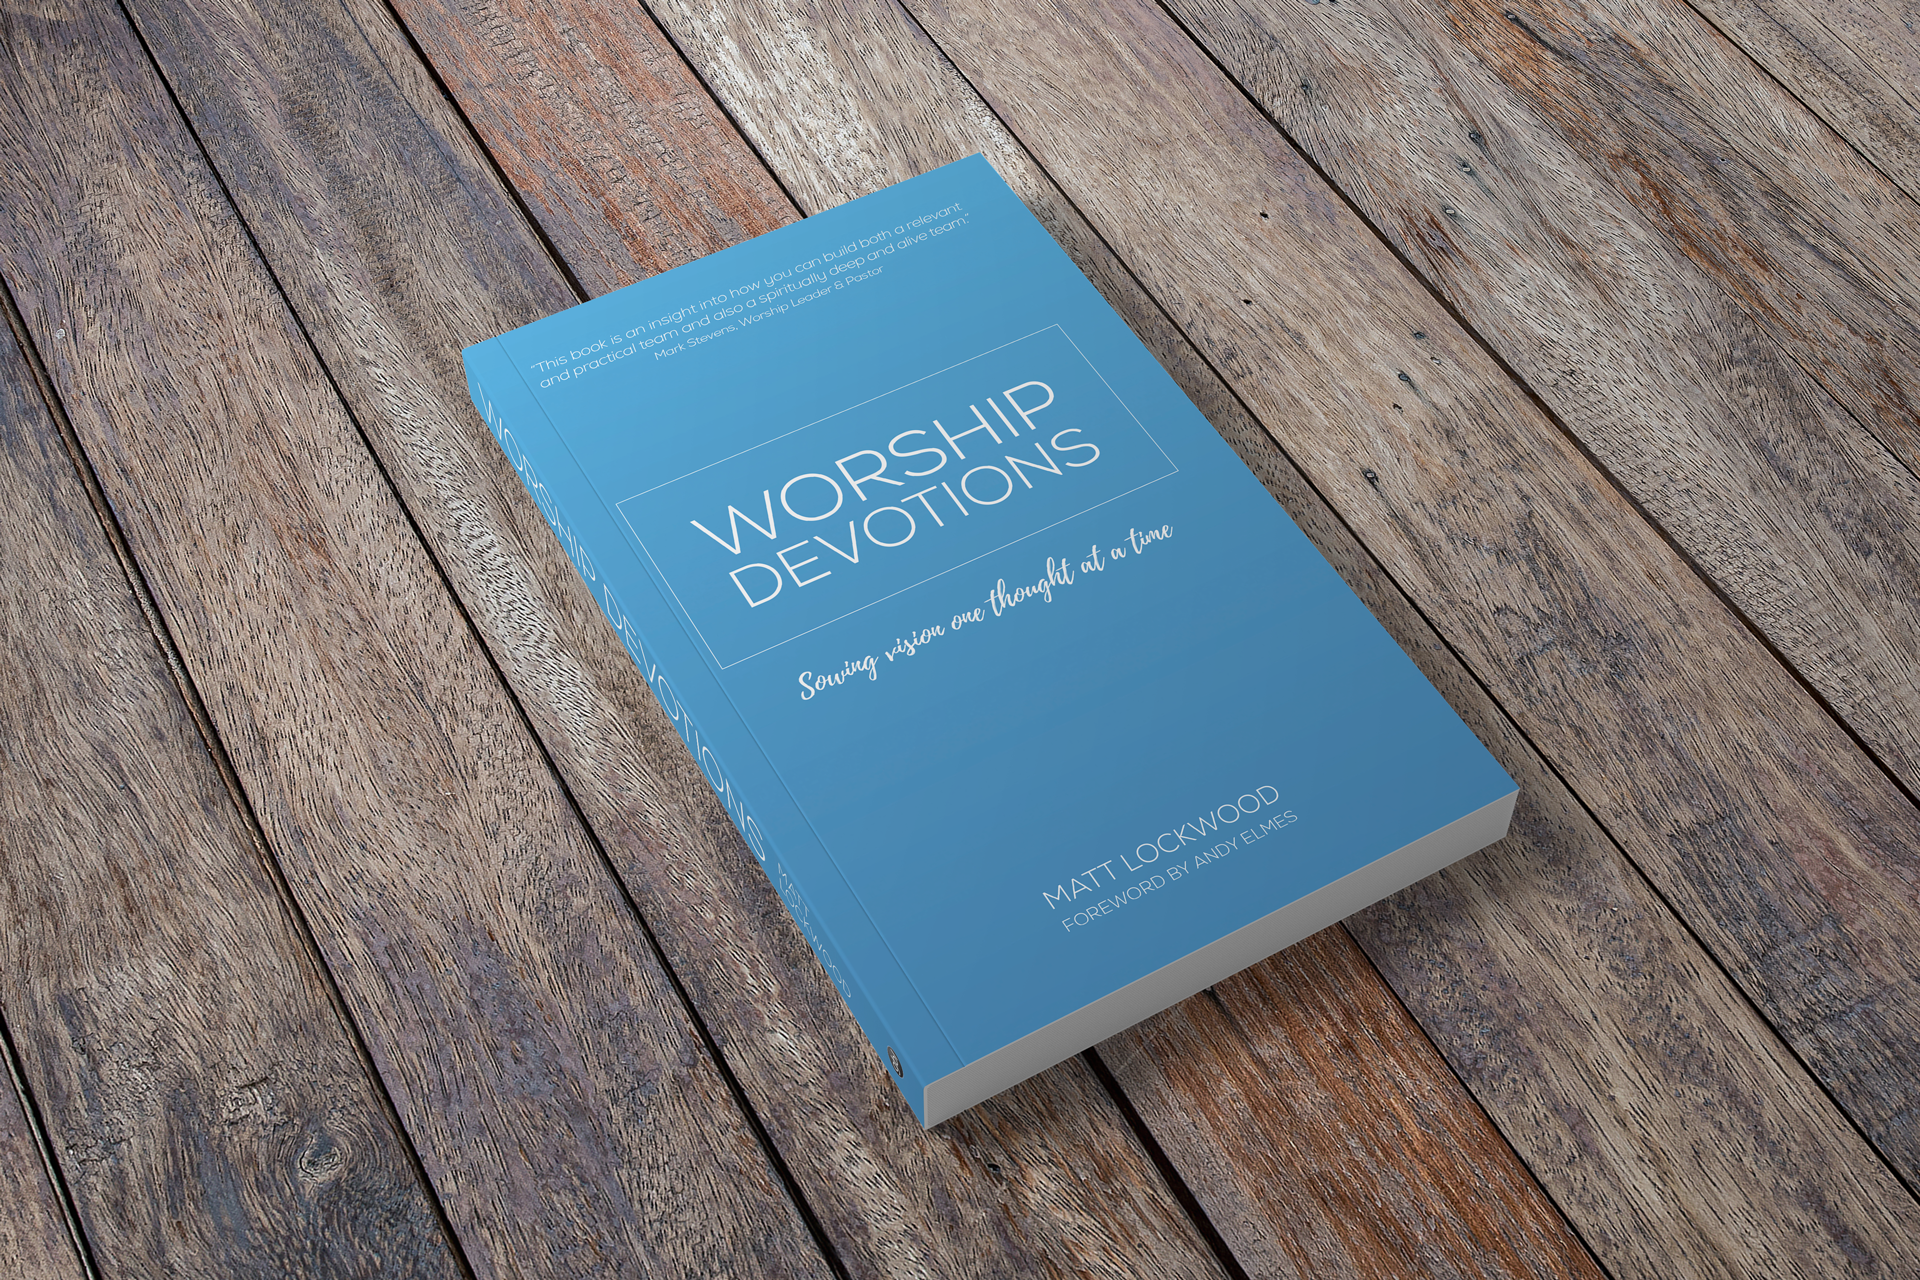 Worship Devotions book cover